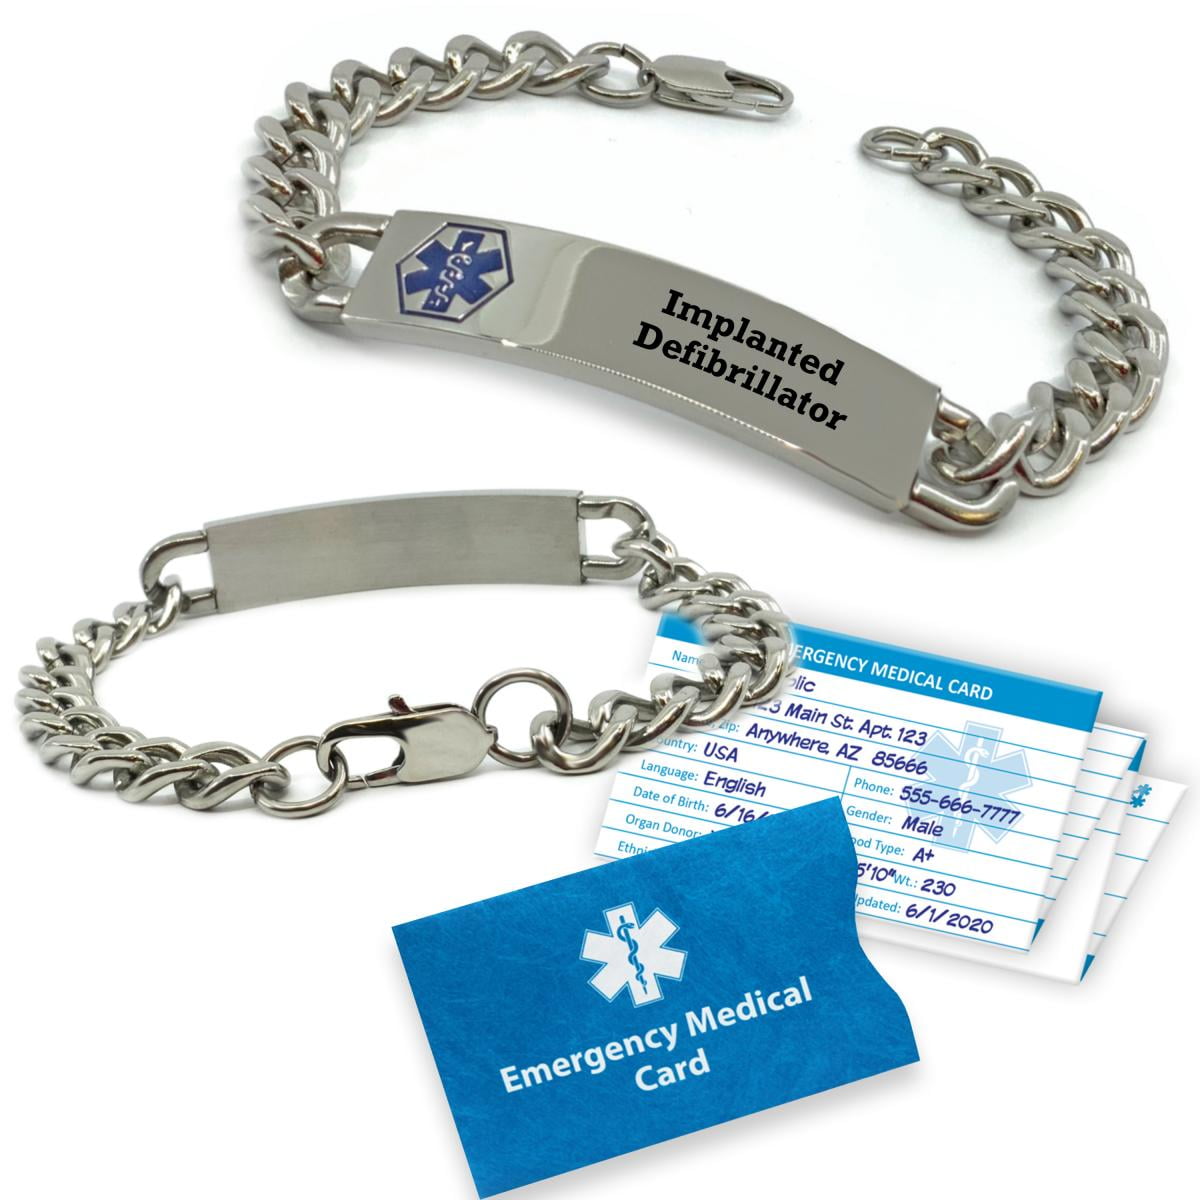 Pre engraved IMPLANTED DEFIBRILLATOR Traditional Stainless Steel Curb Link Medical ID Bracelets Incl Shipping Alert Wallet Card Complimentary Access b5e6007b 01bc 47d7 898a 6ccaae739dc8.153aaf537a9cf65e62a4c22dec52457d